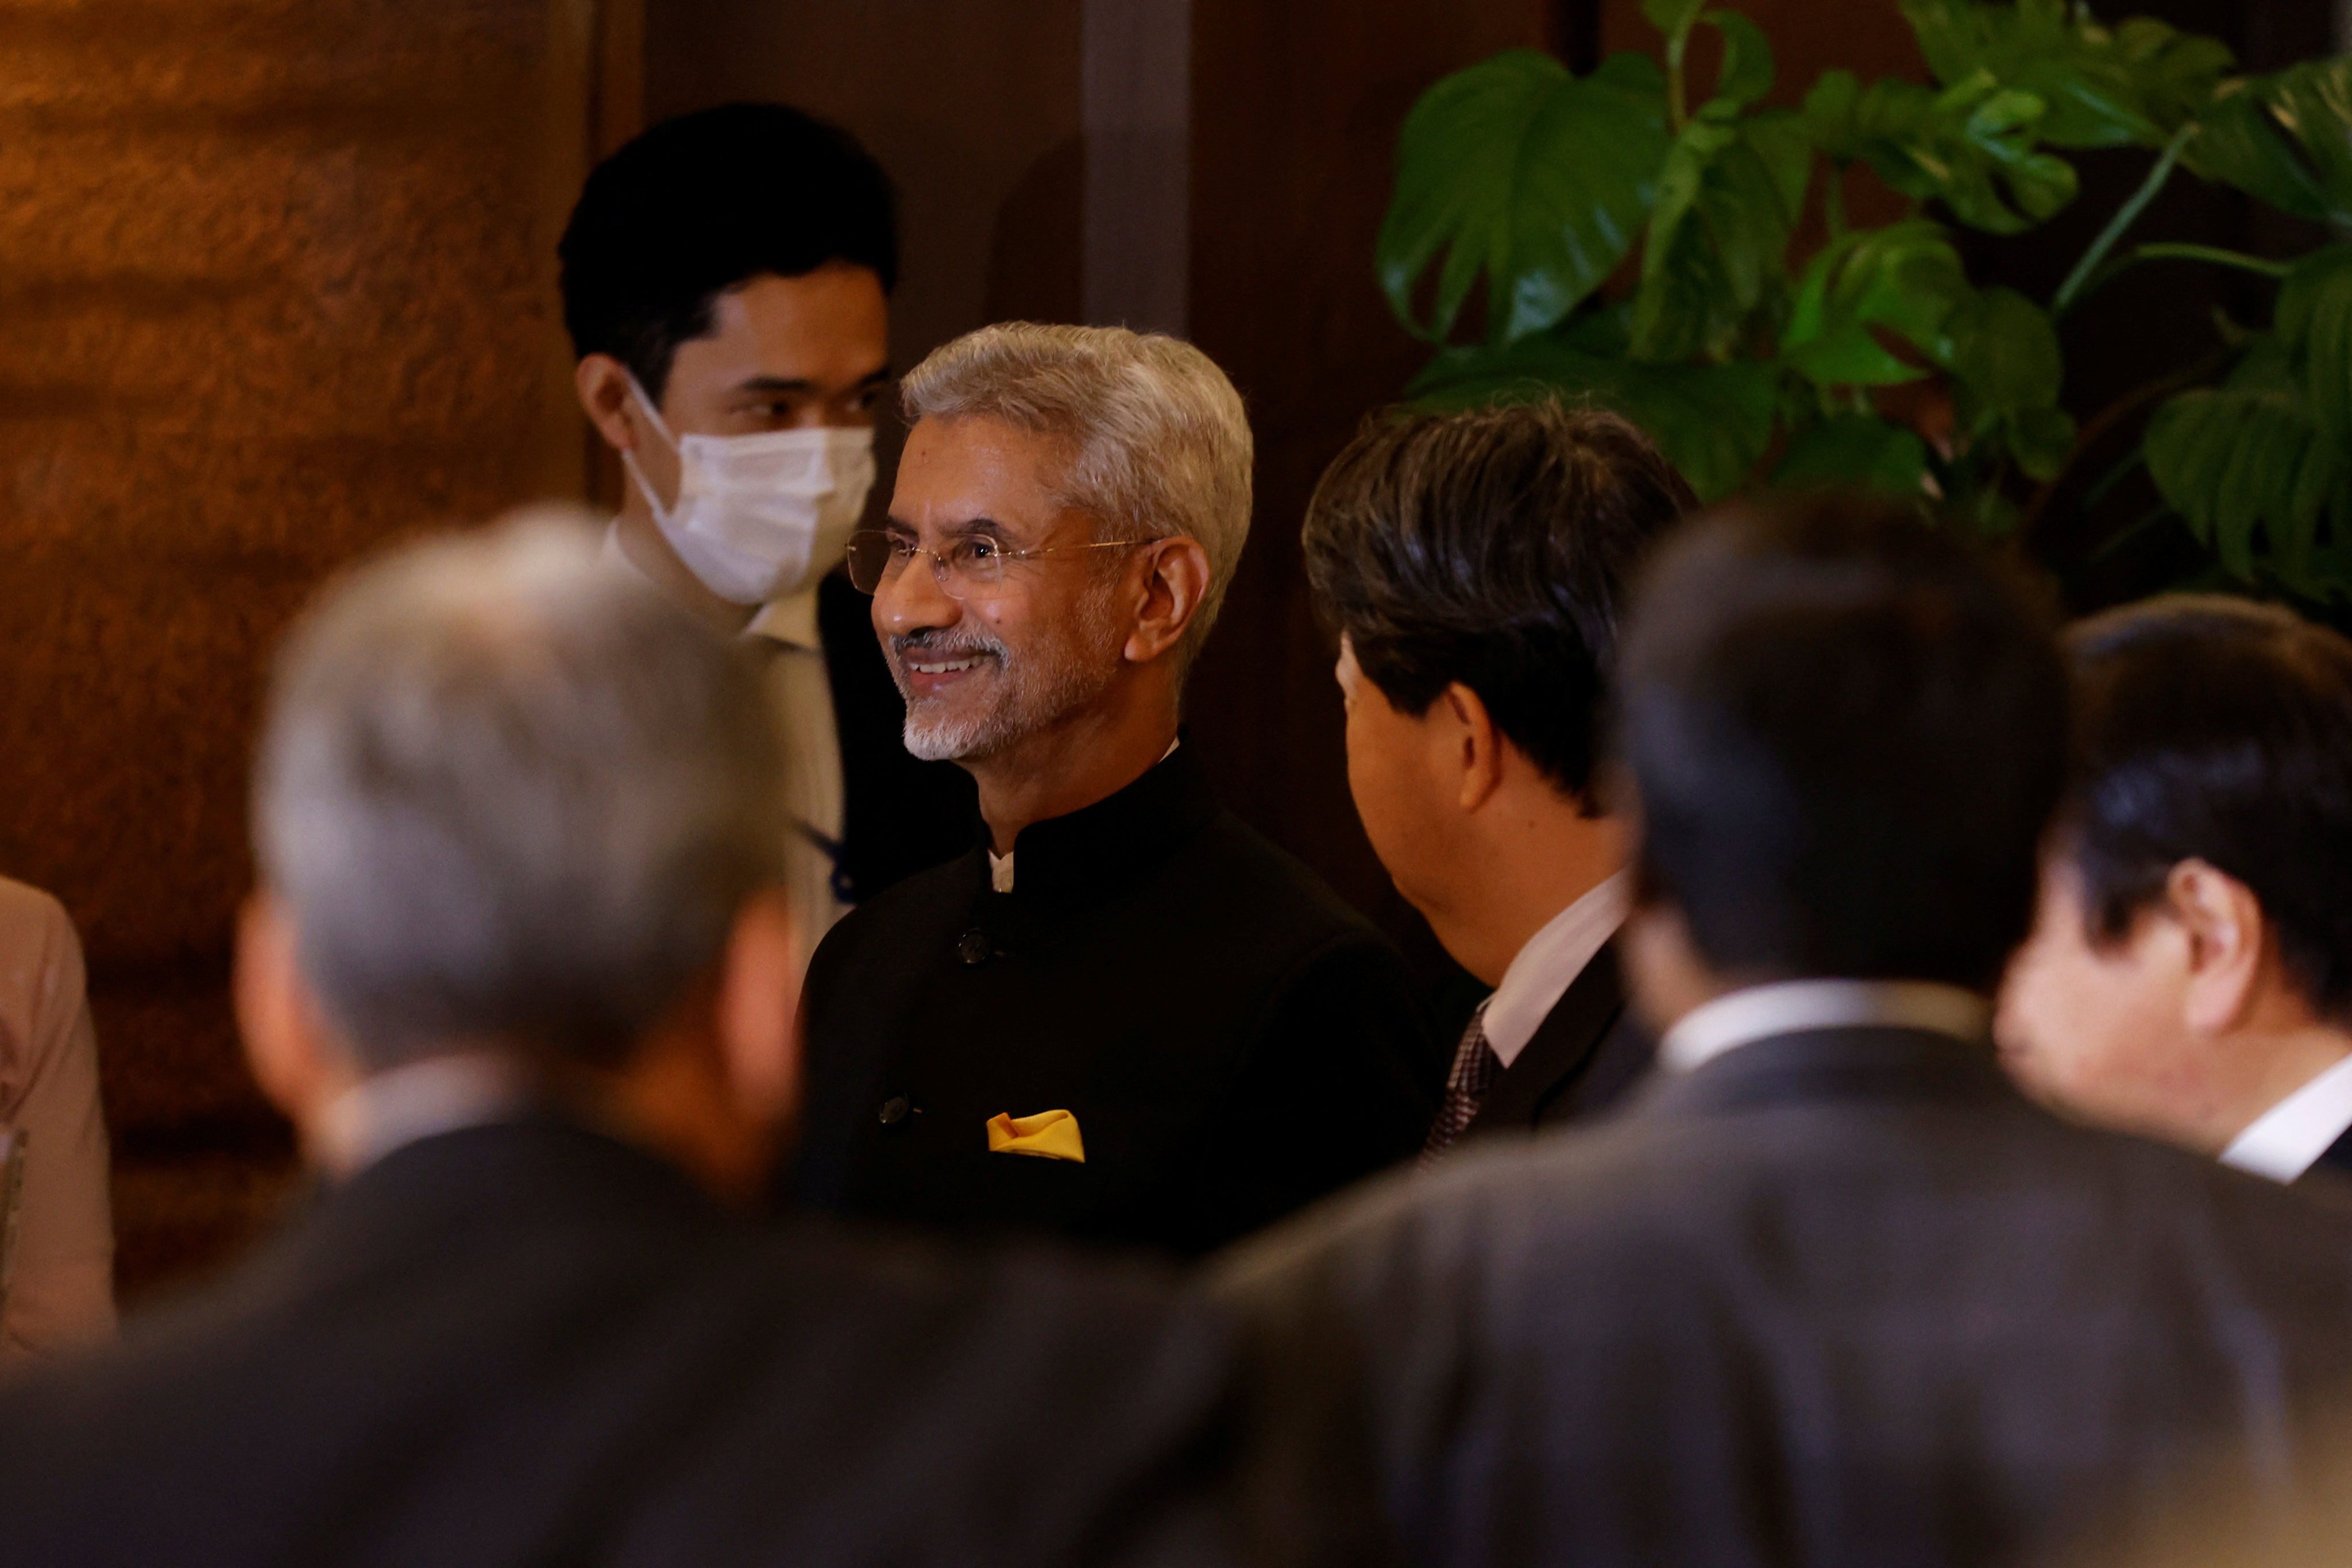 Indian External Affairs Minister Subrahmanyam Jaishankar has more than 50 official engagements scheduled during an 11-day visit to the United States that starts this week. Photo: Reuters